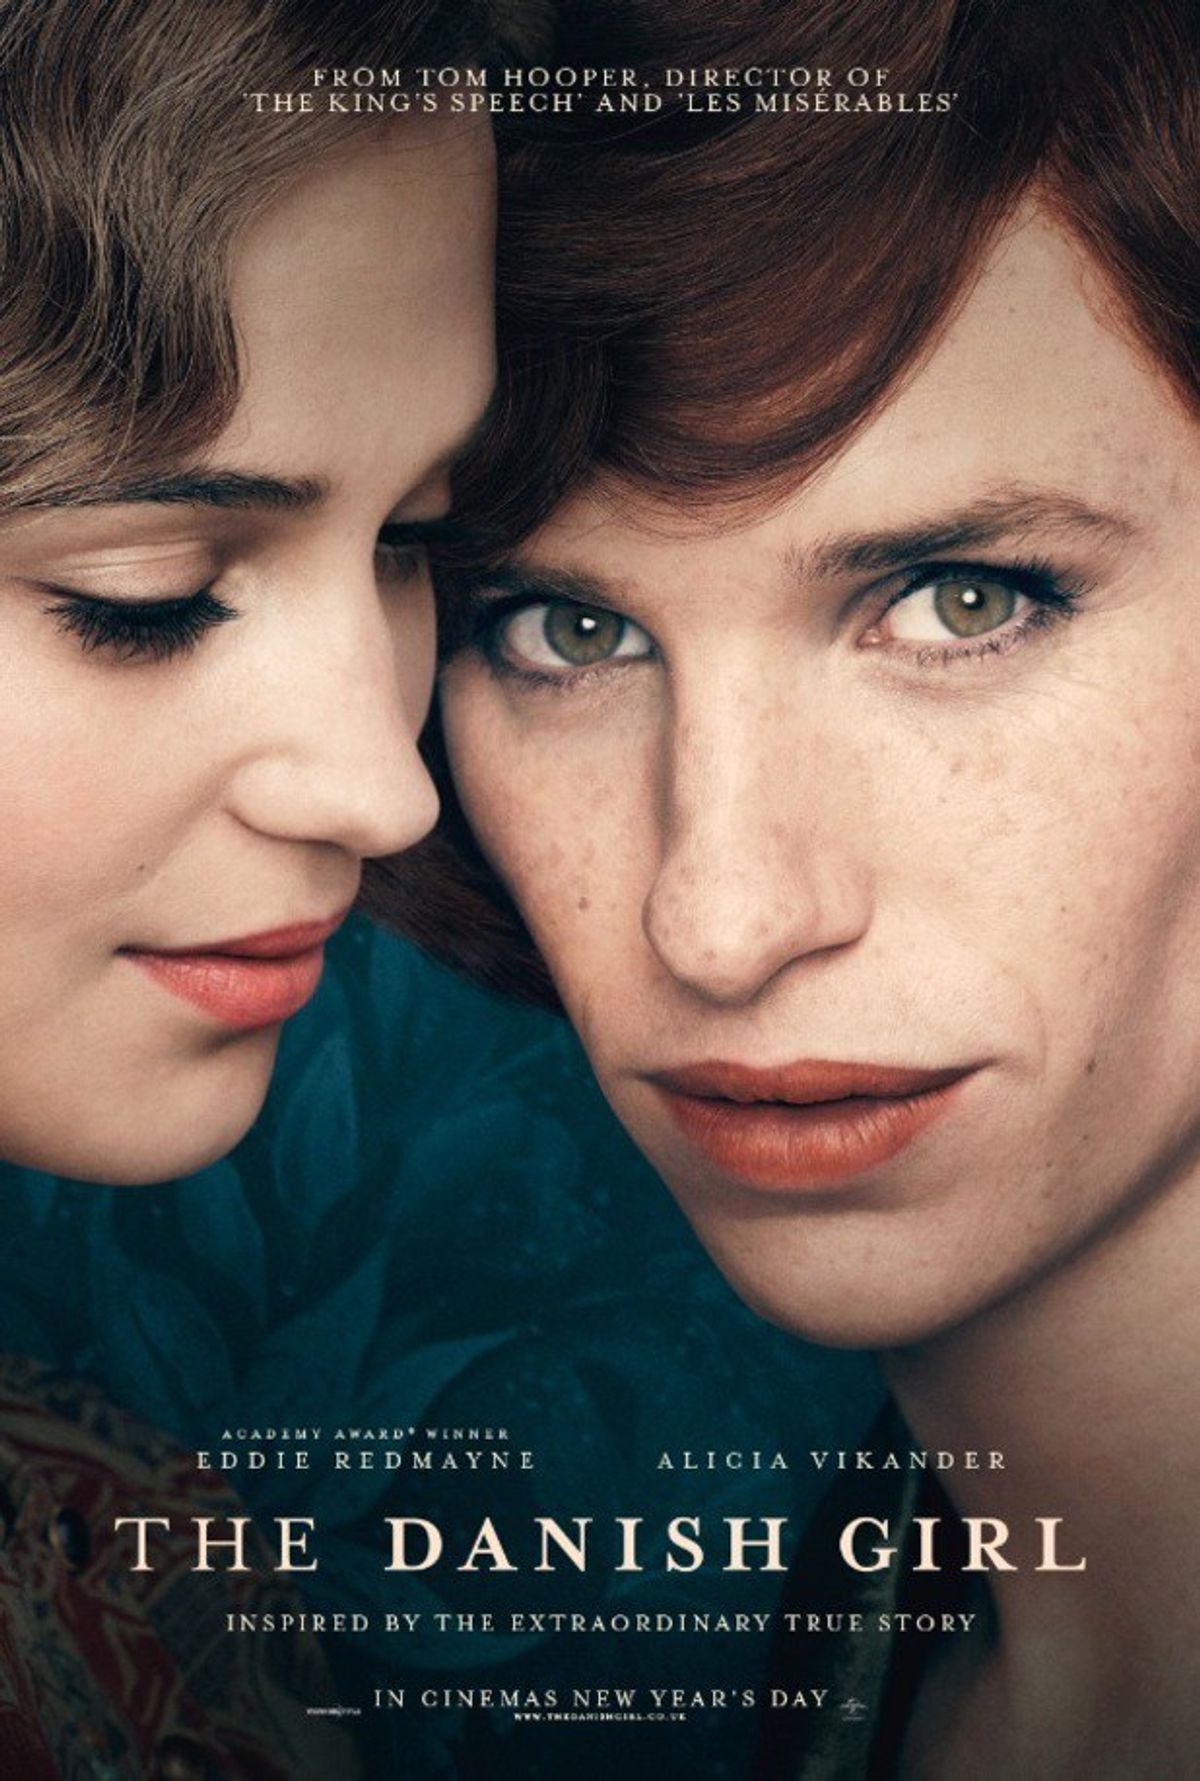 'The Danish Girl': A Review And The Importance Of Transgender Visibility